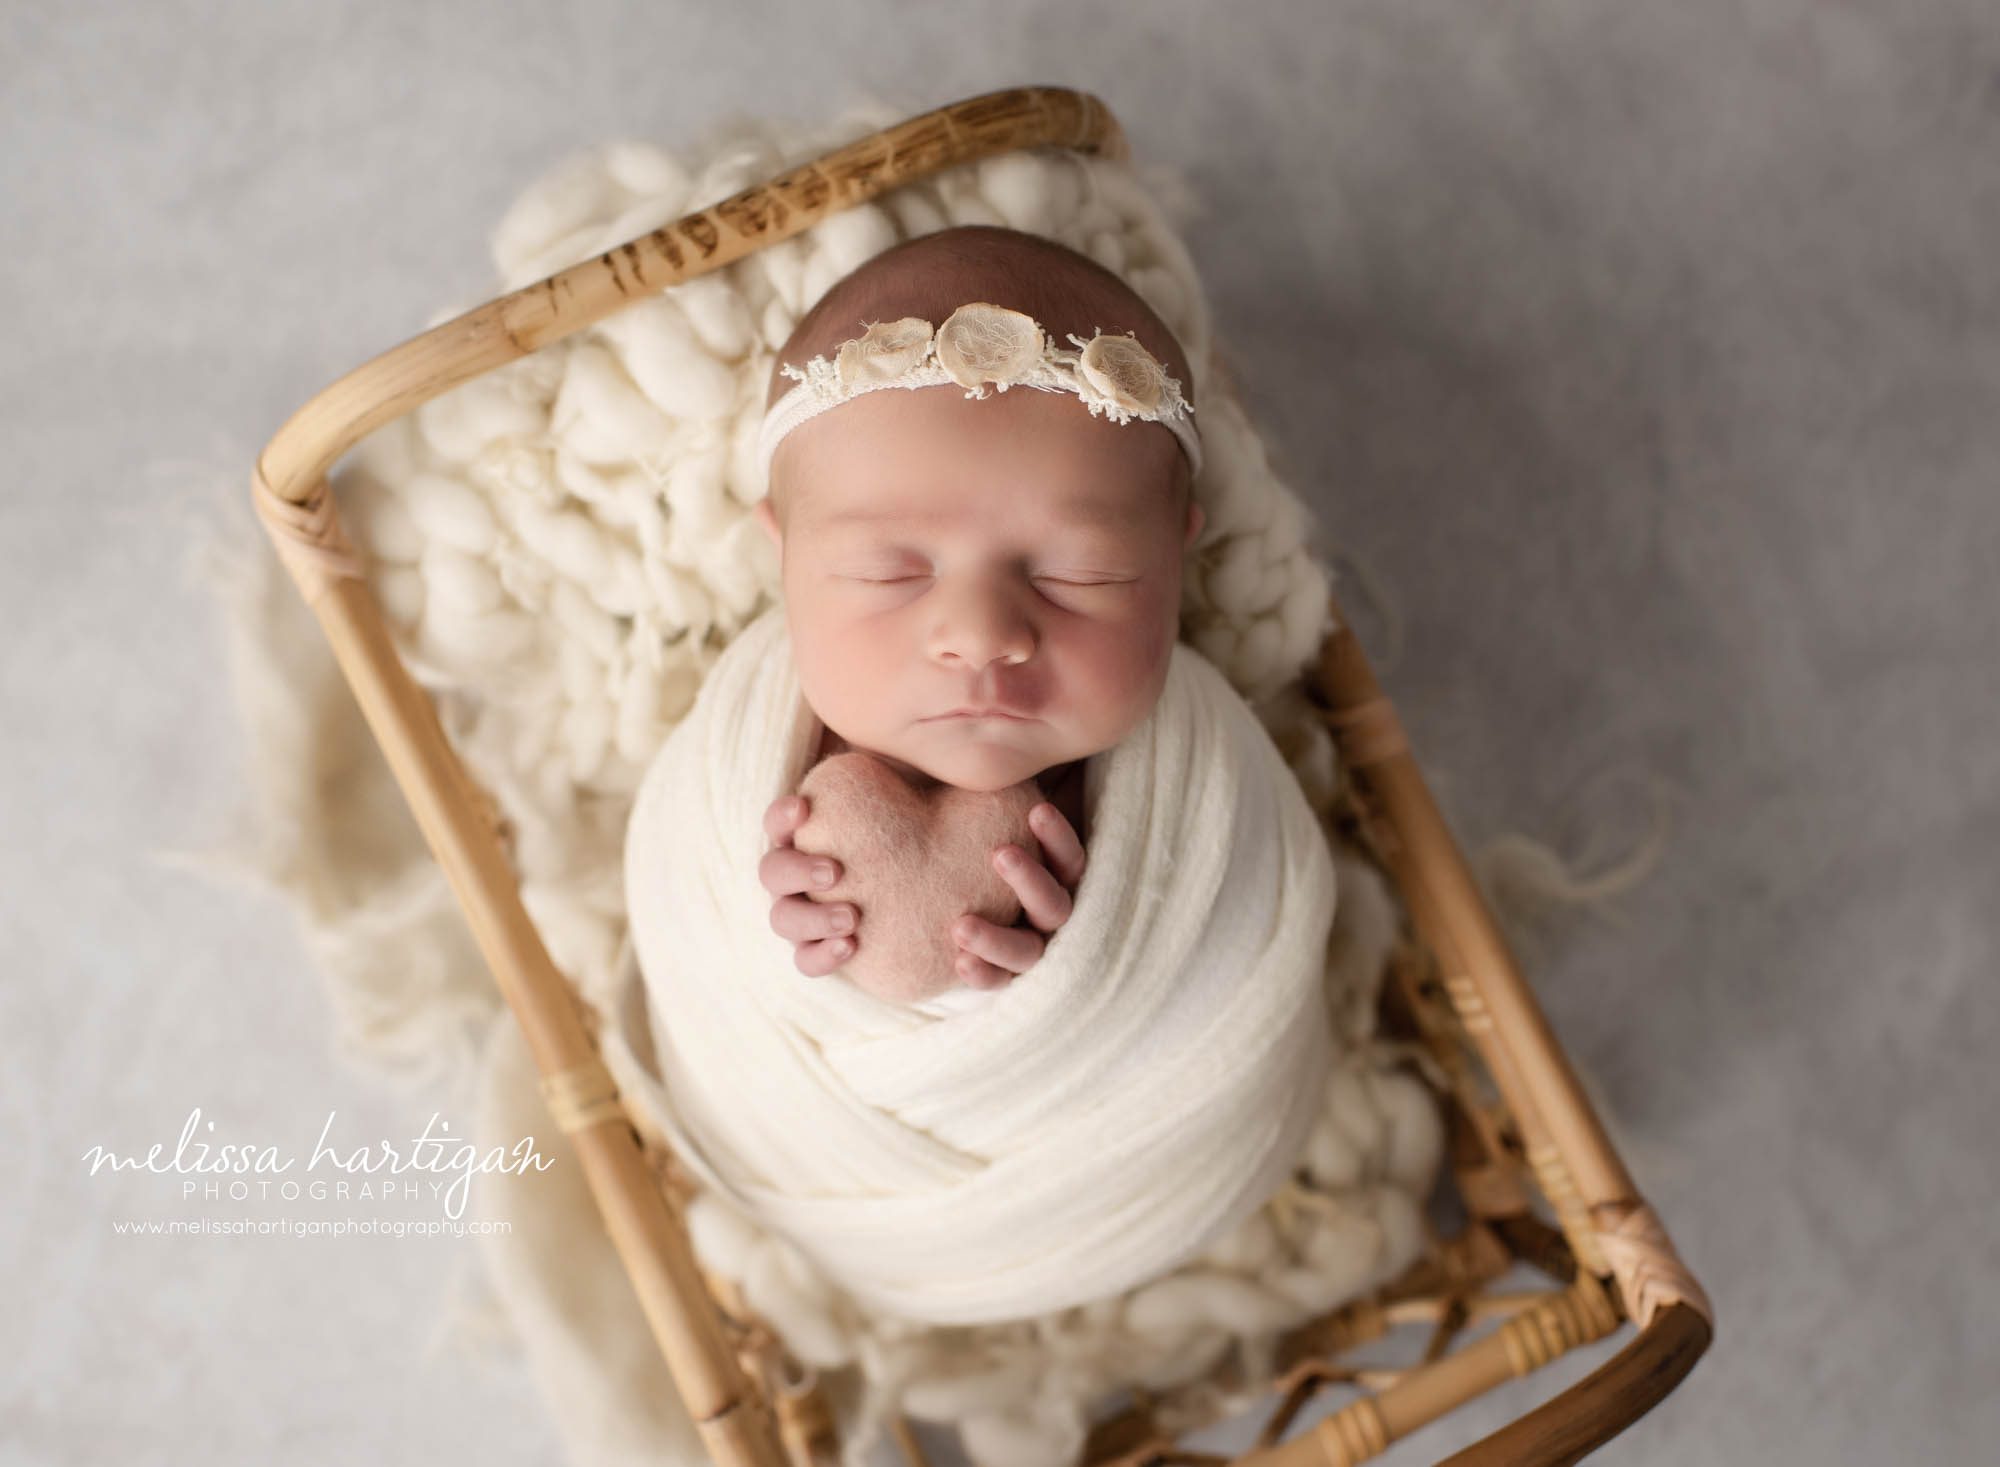 newborn baby girl wrapped in cream white wrap wearing headband holding pink felted heart prop Connecticut newborn photography